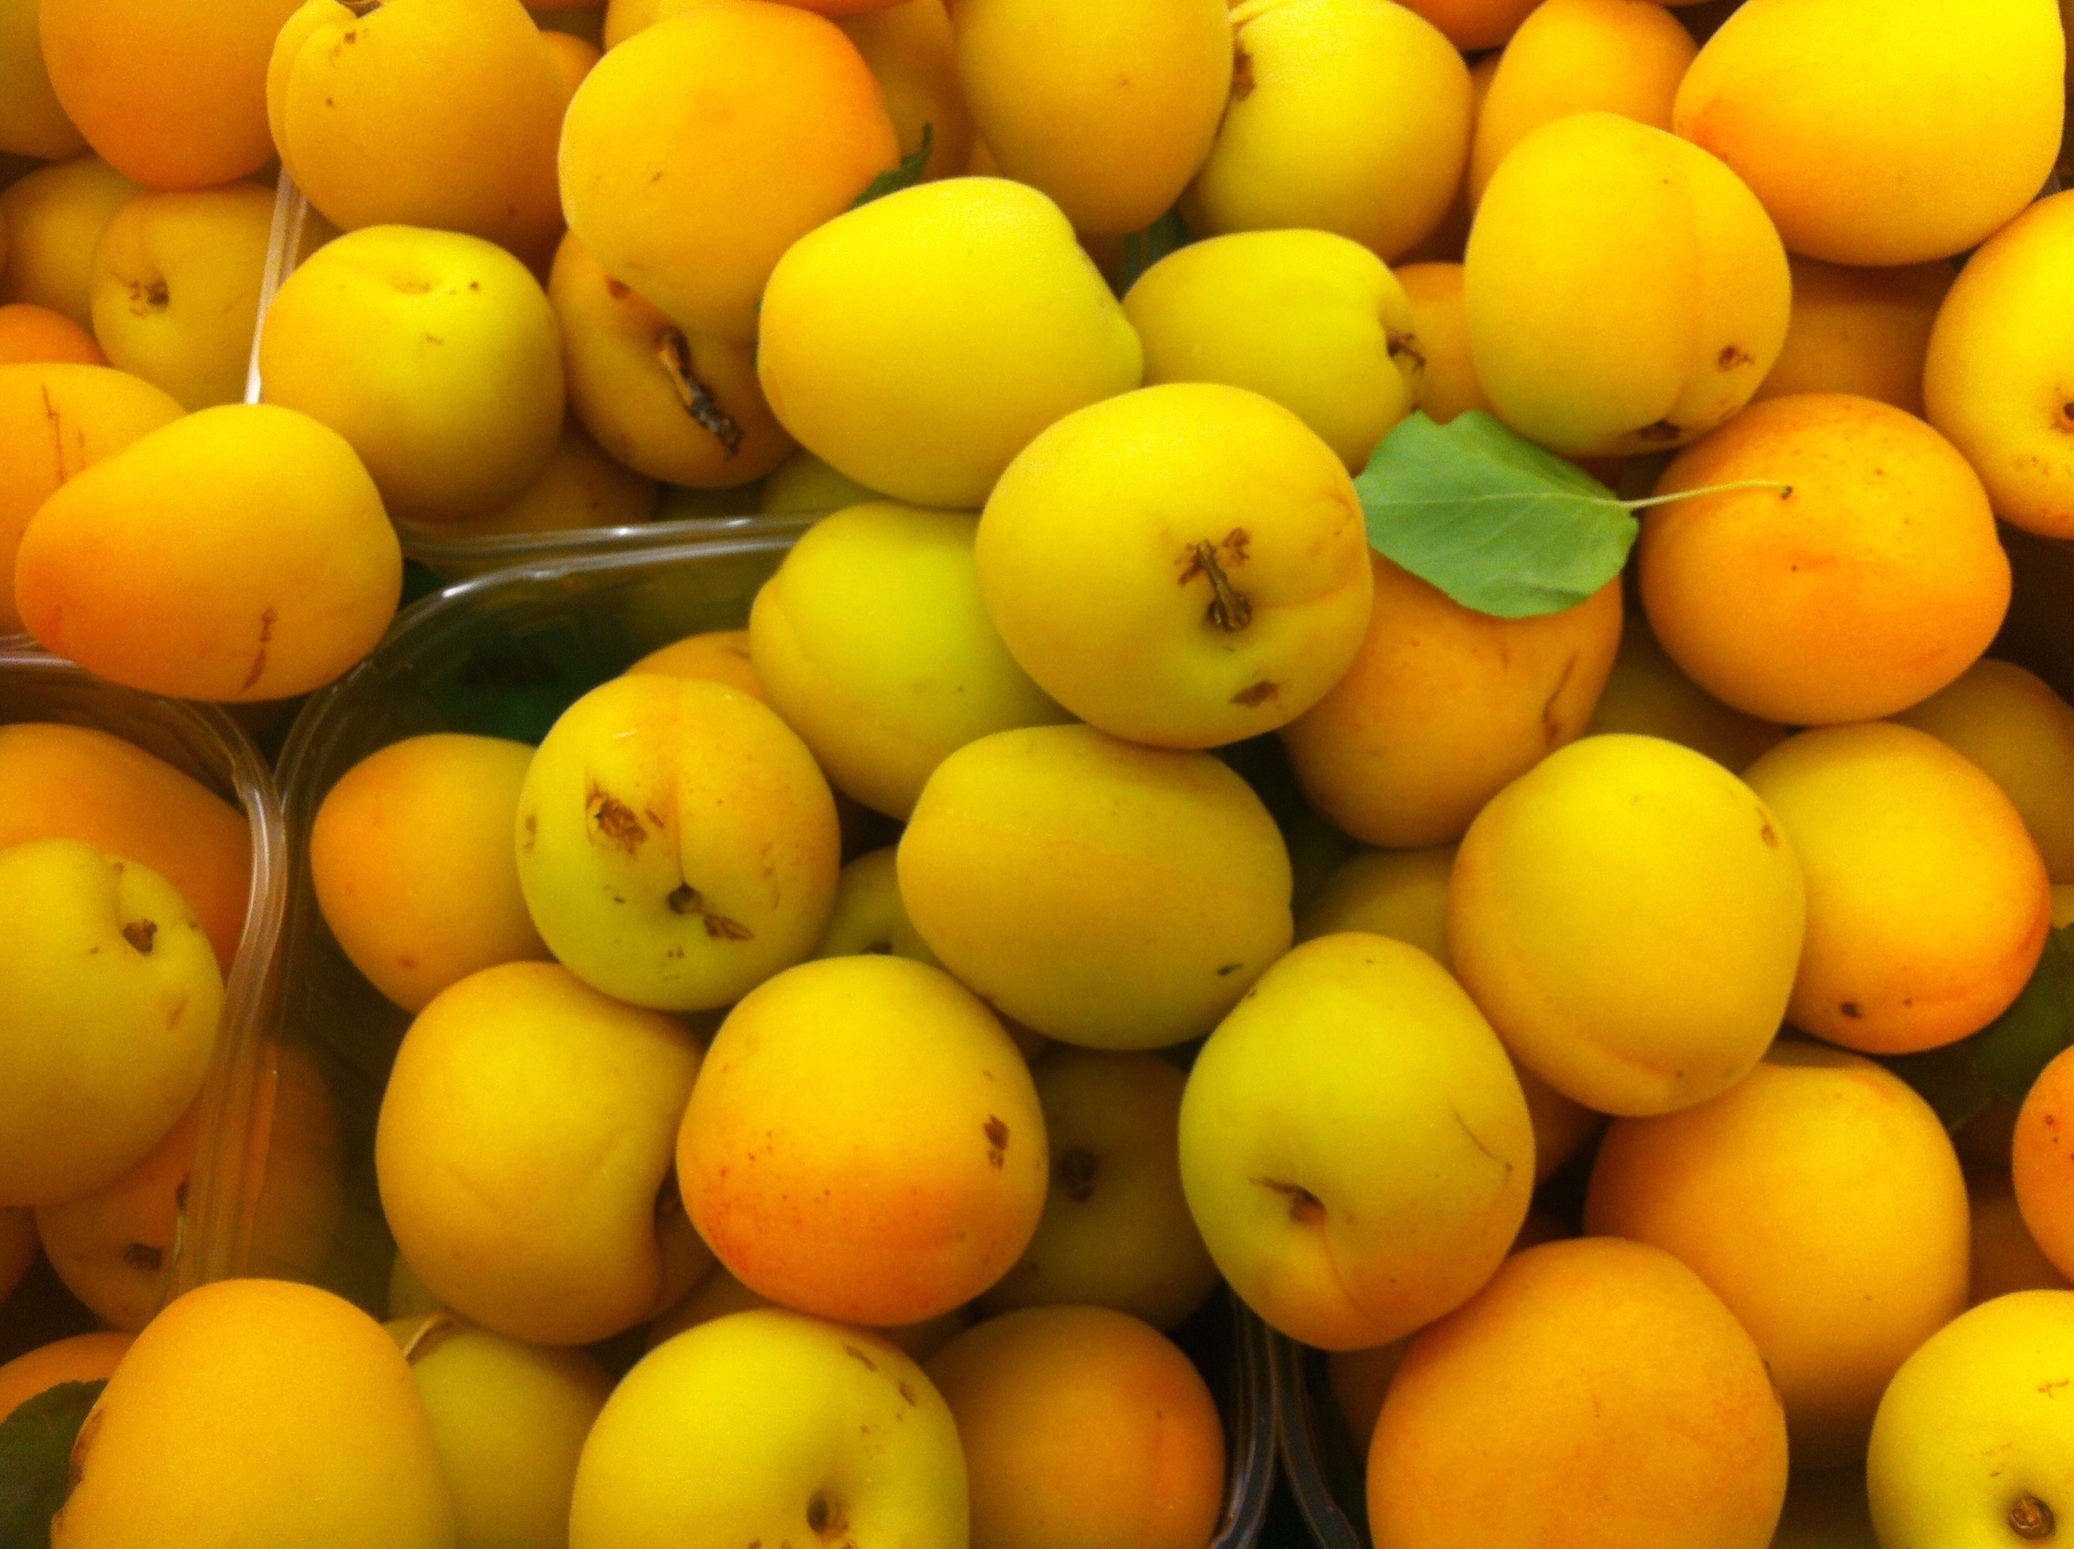 Italians love their apricots and so do I